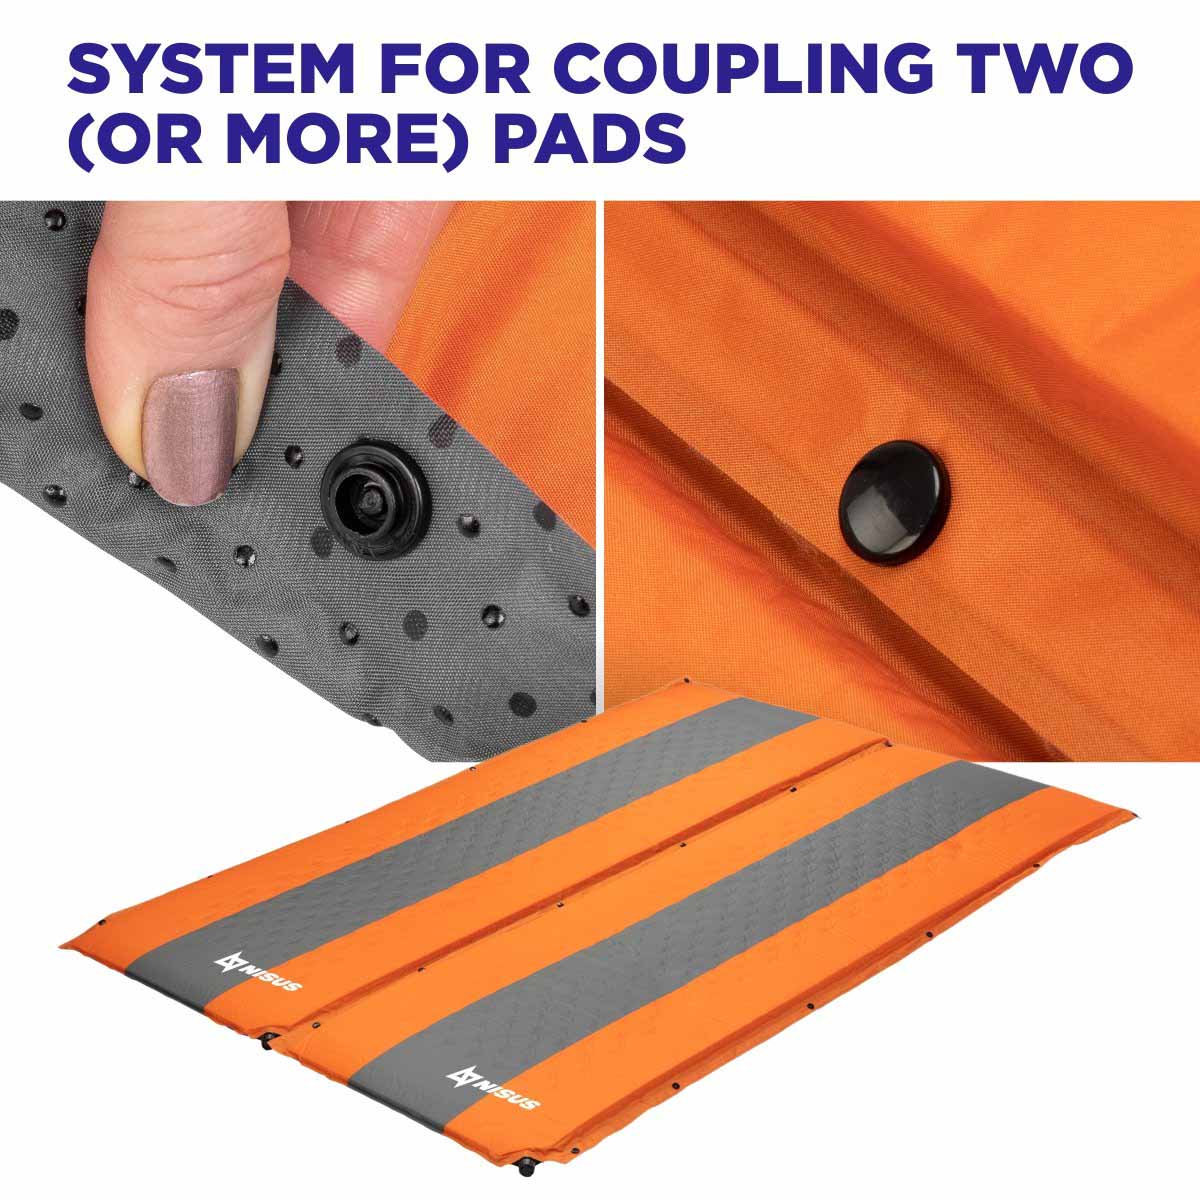 Orange Self Inflating Sleeping Pads could be easily connected one after each other with a clip to make a big pad for two